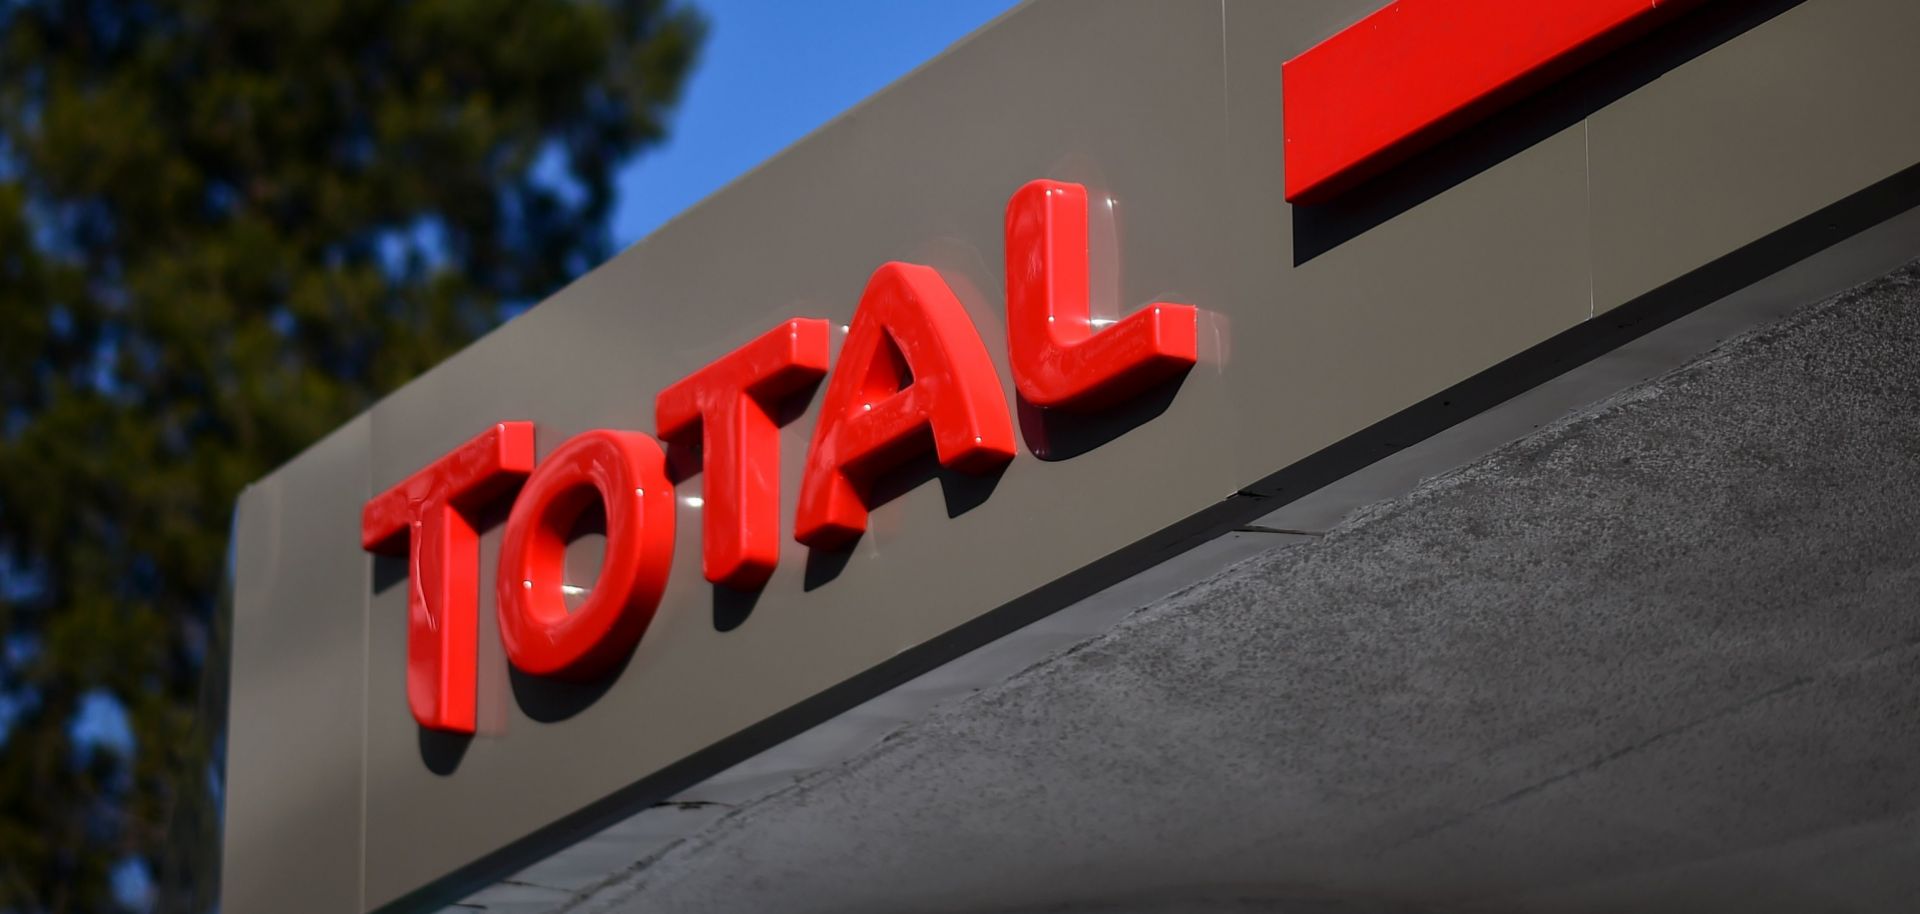 A photo of a sign of France's oil and energy company Total, taken in Mexico City on Jan. 17, 2018.